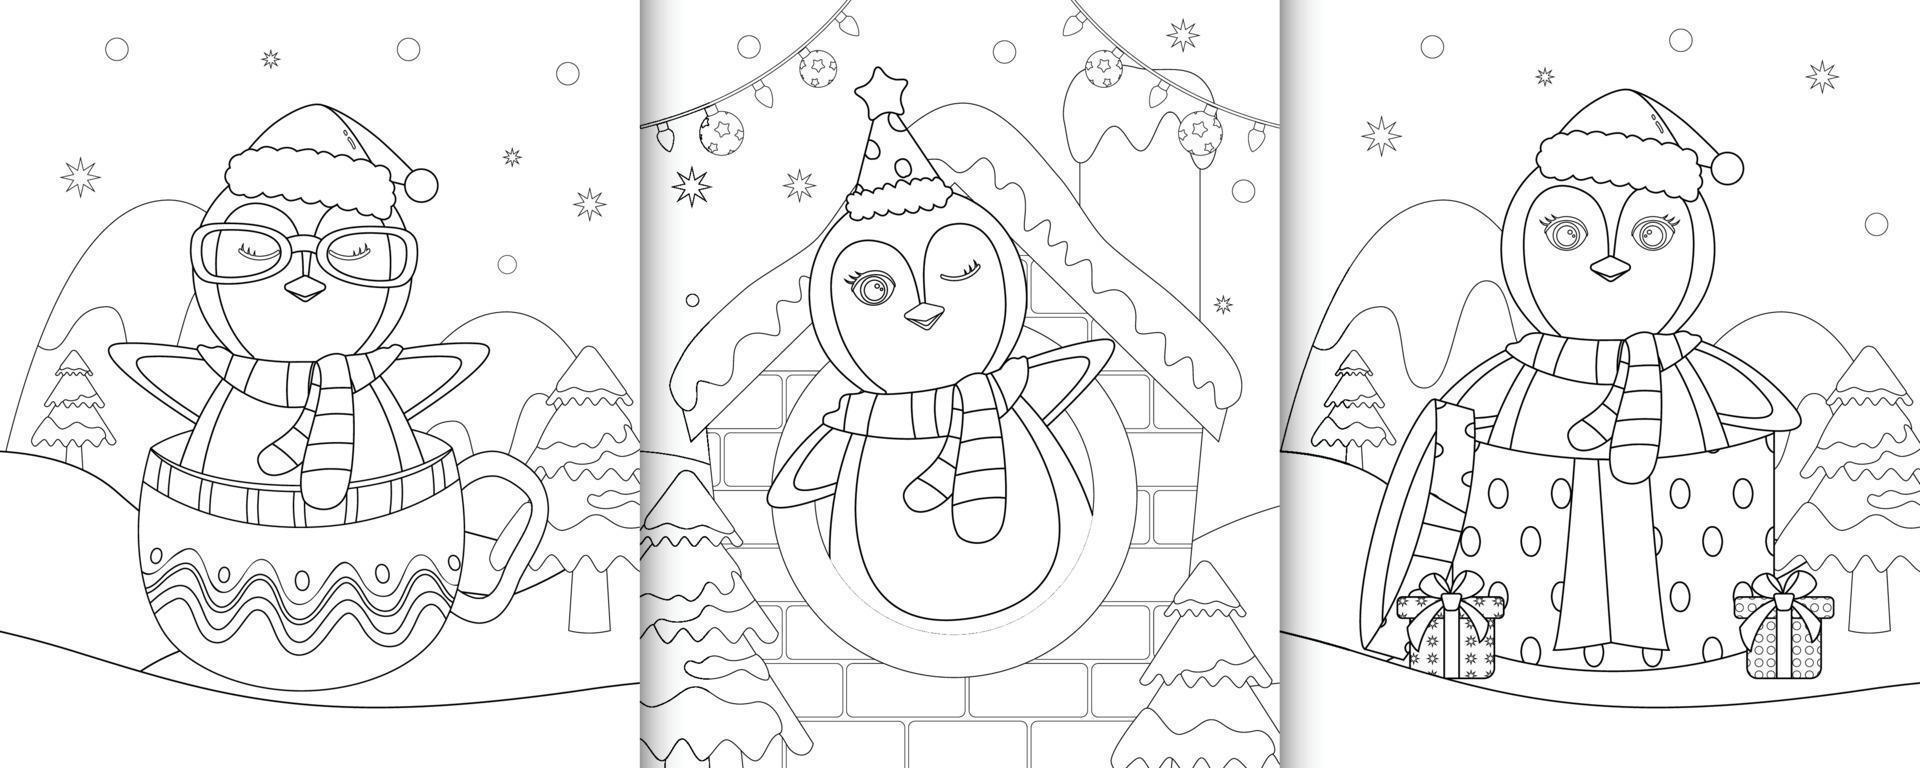 coloring book with cute penguin christmas characters vector